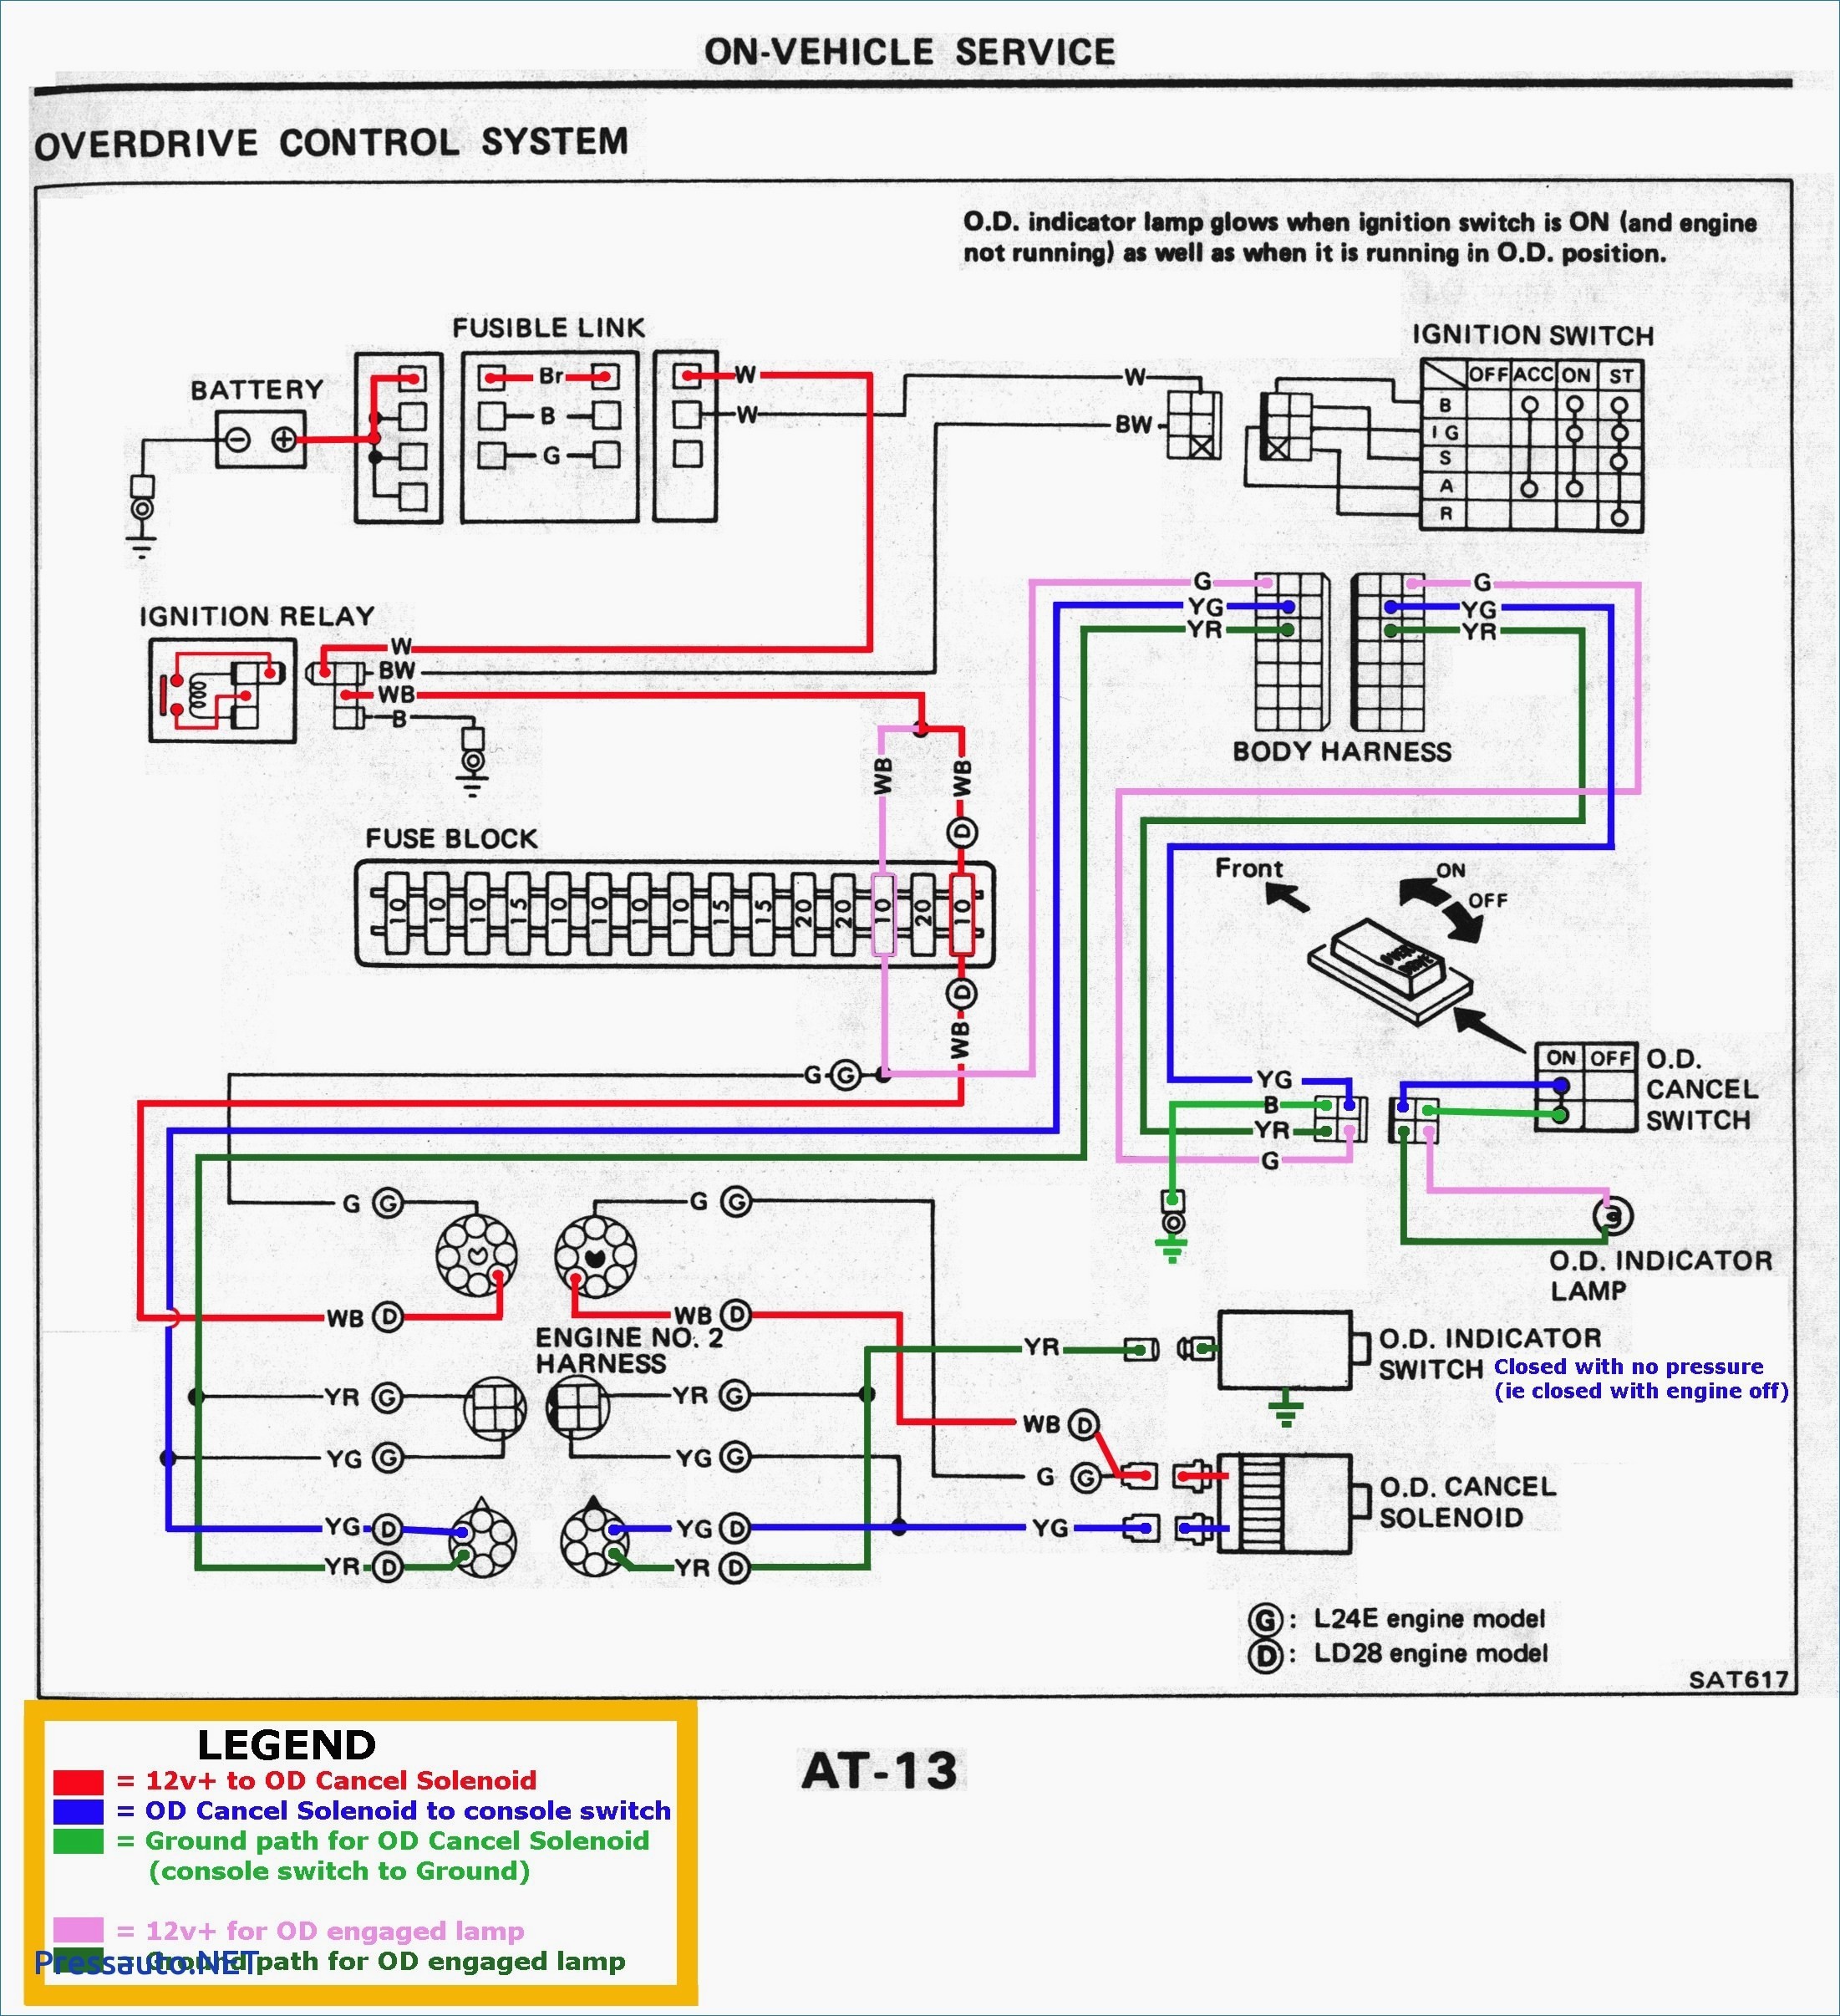 how to wire an ignition coil diagram best of magnificent wiring ignition coil circuit diagram how